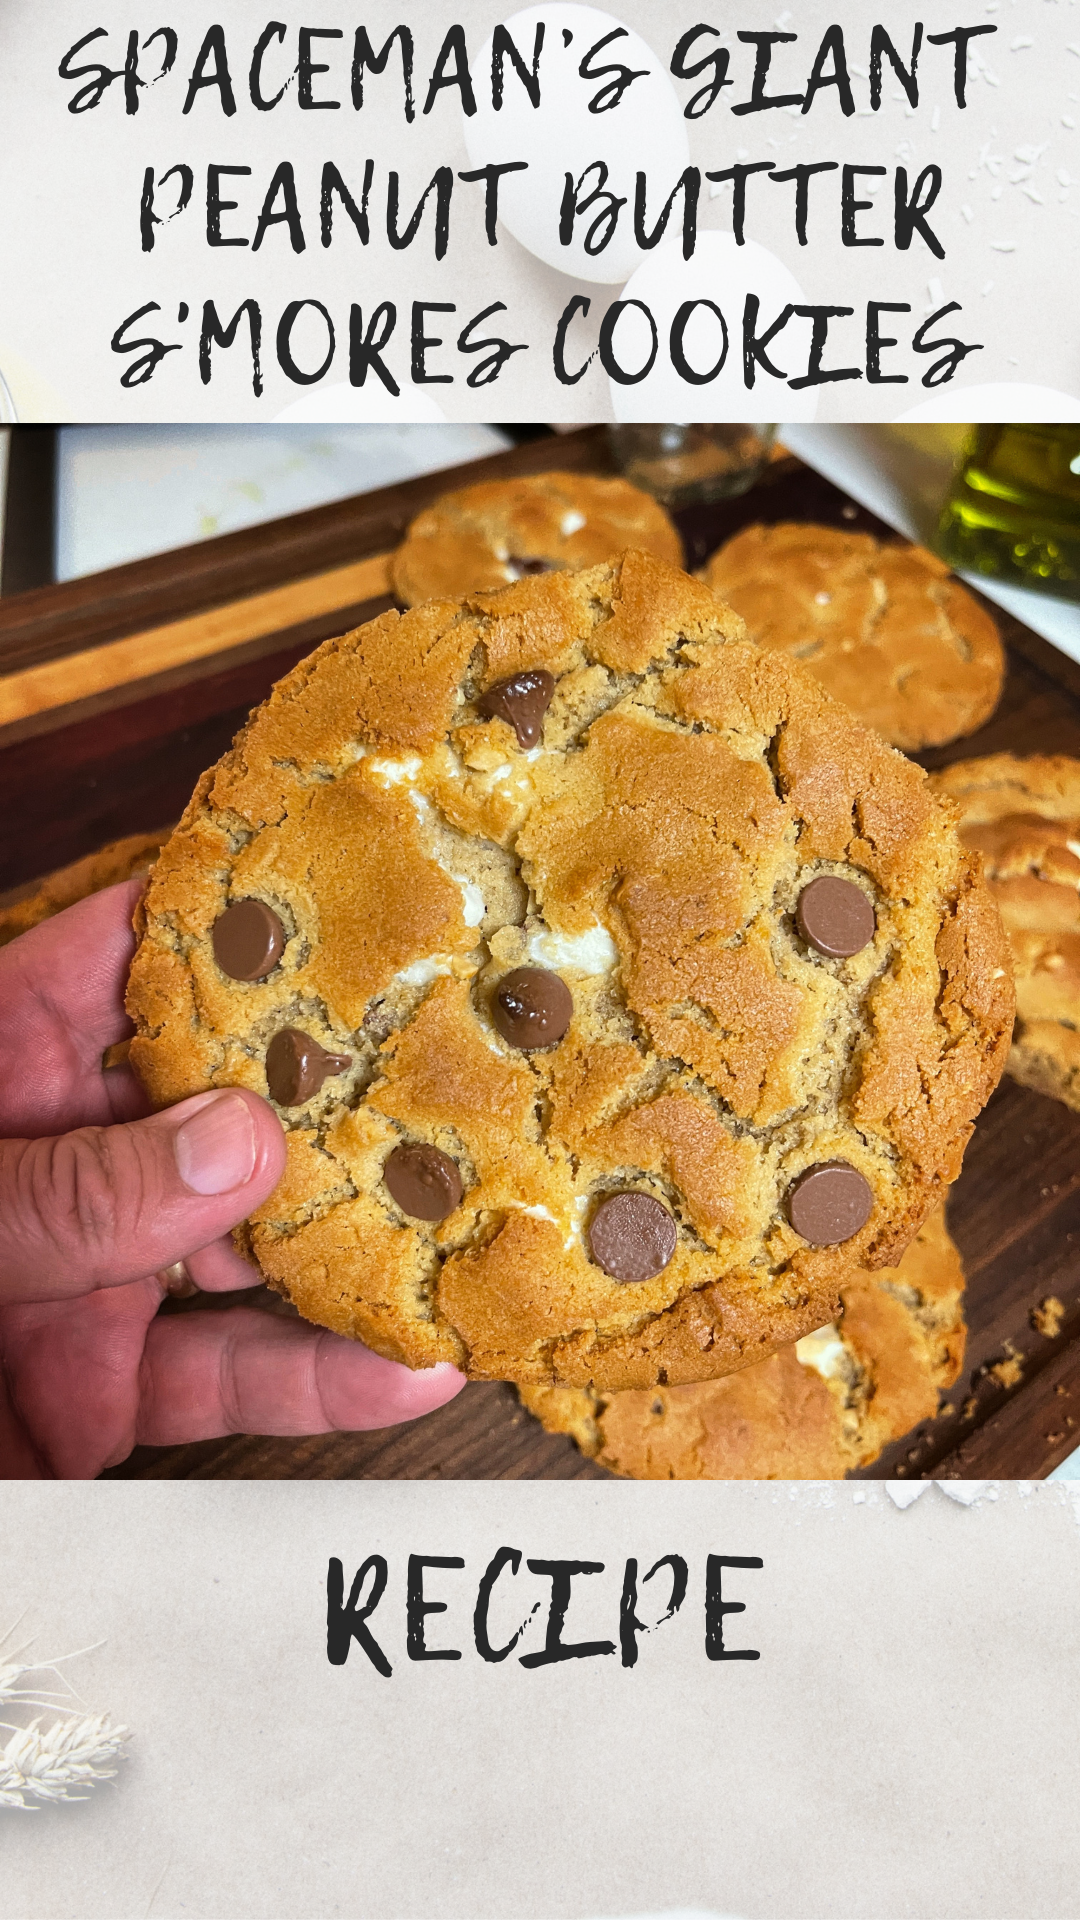 Spaceman's Giant Peanut Butter S'mores Cookies